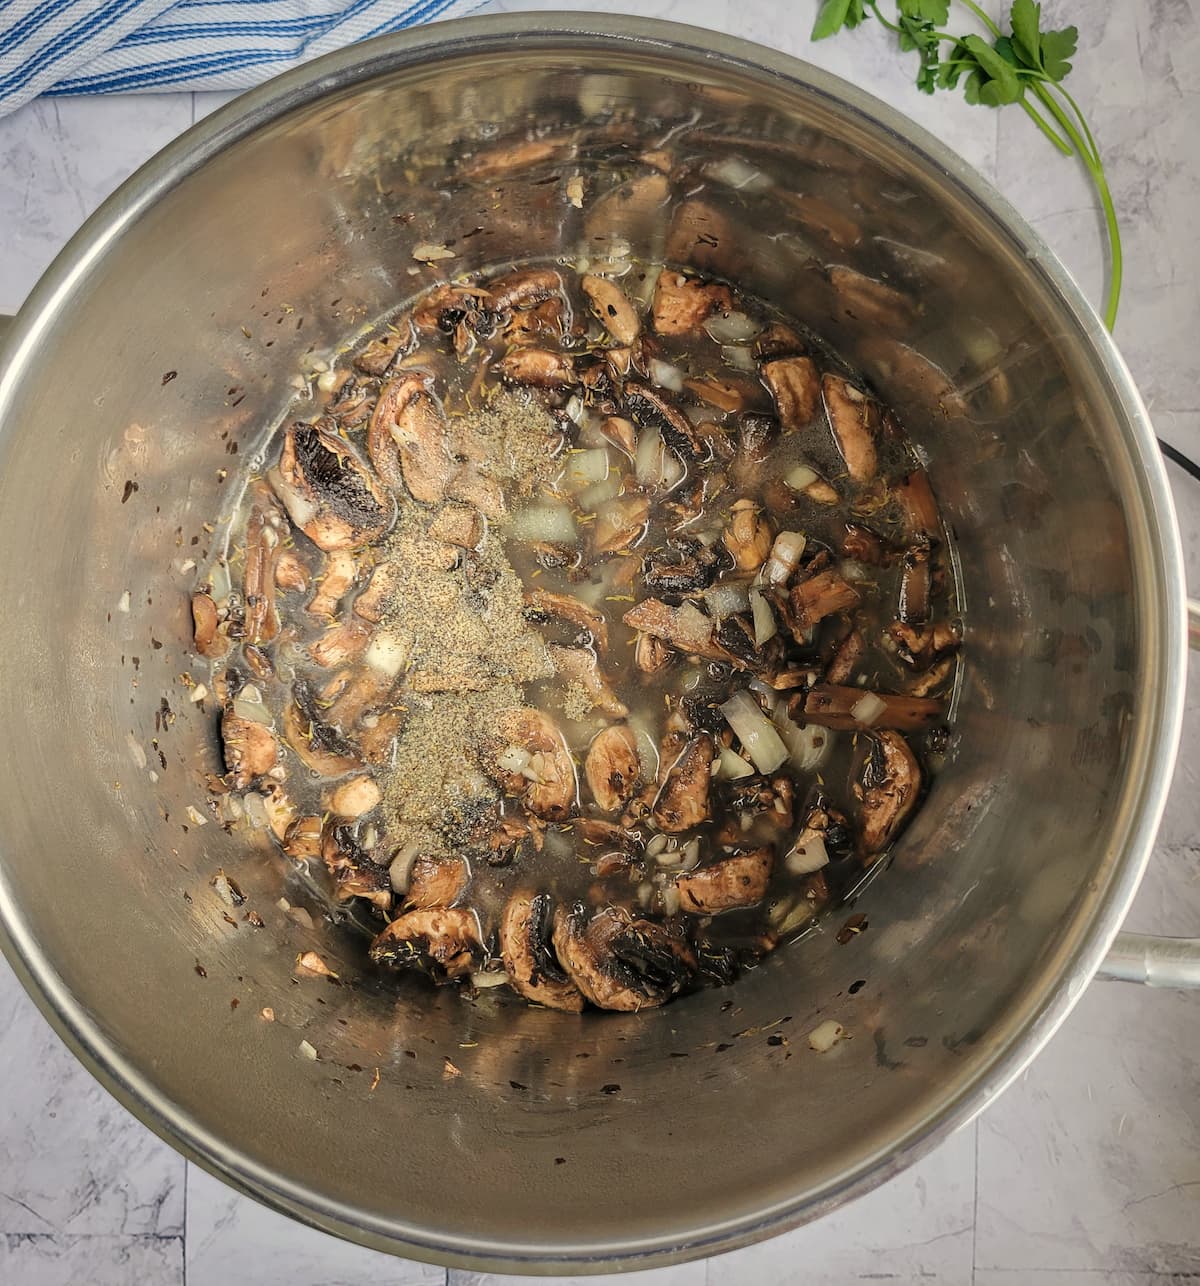 sliced mushrooms, spices and broth in a large pot